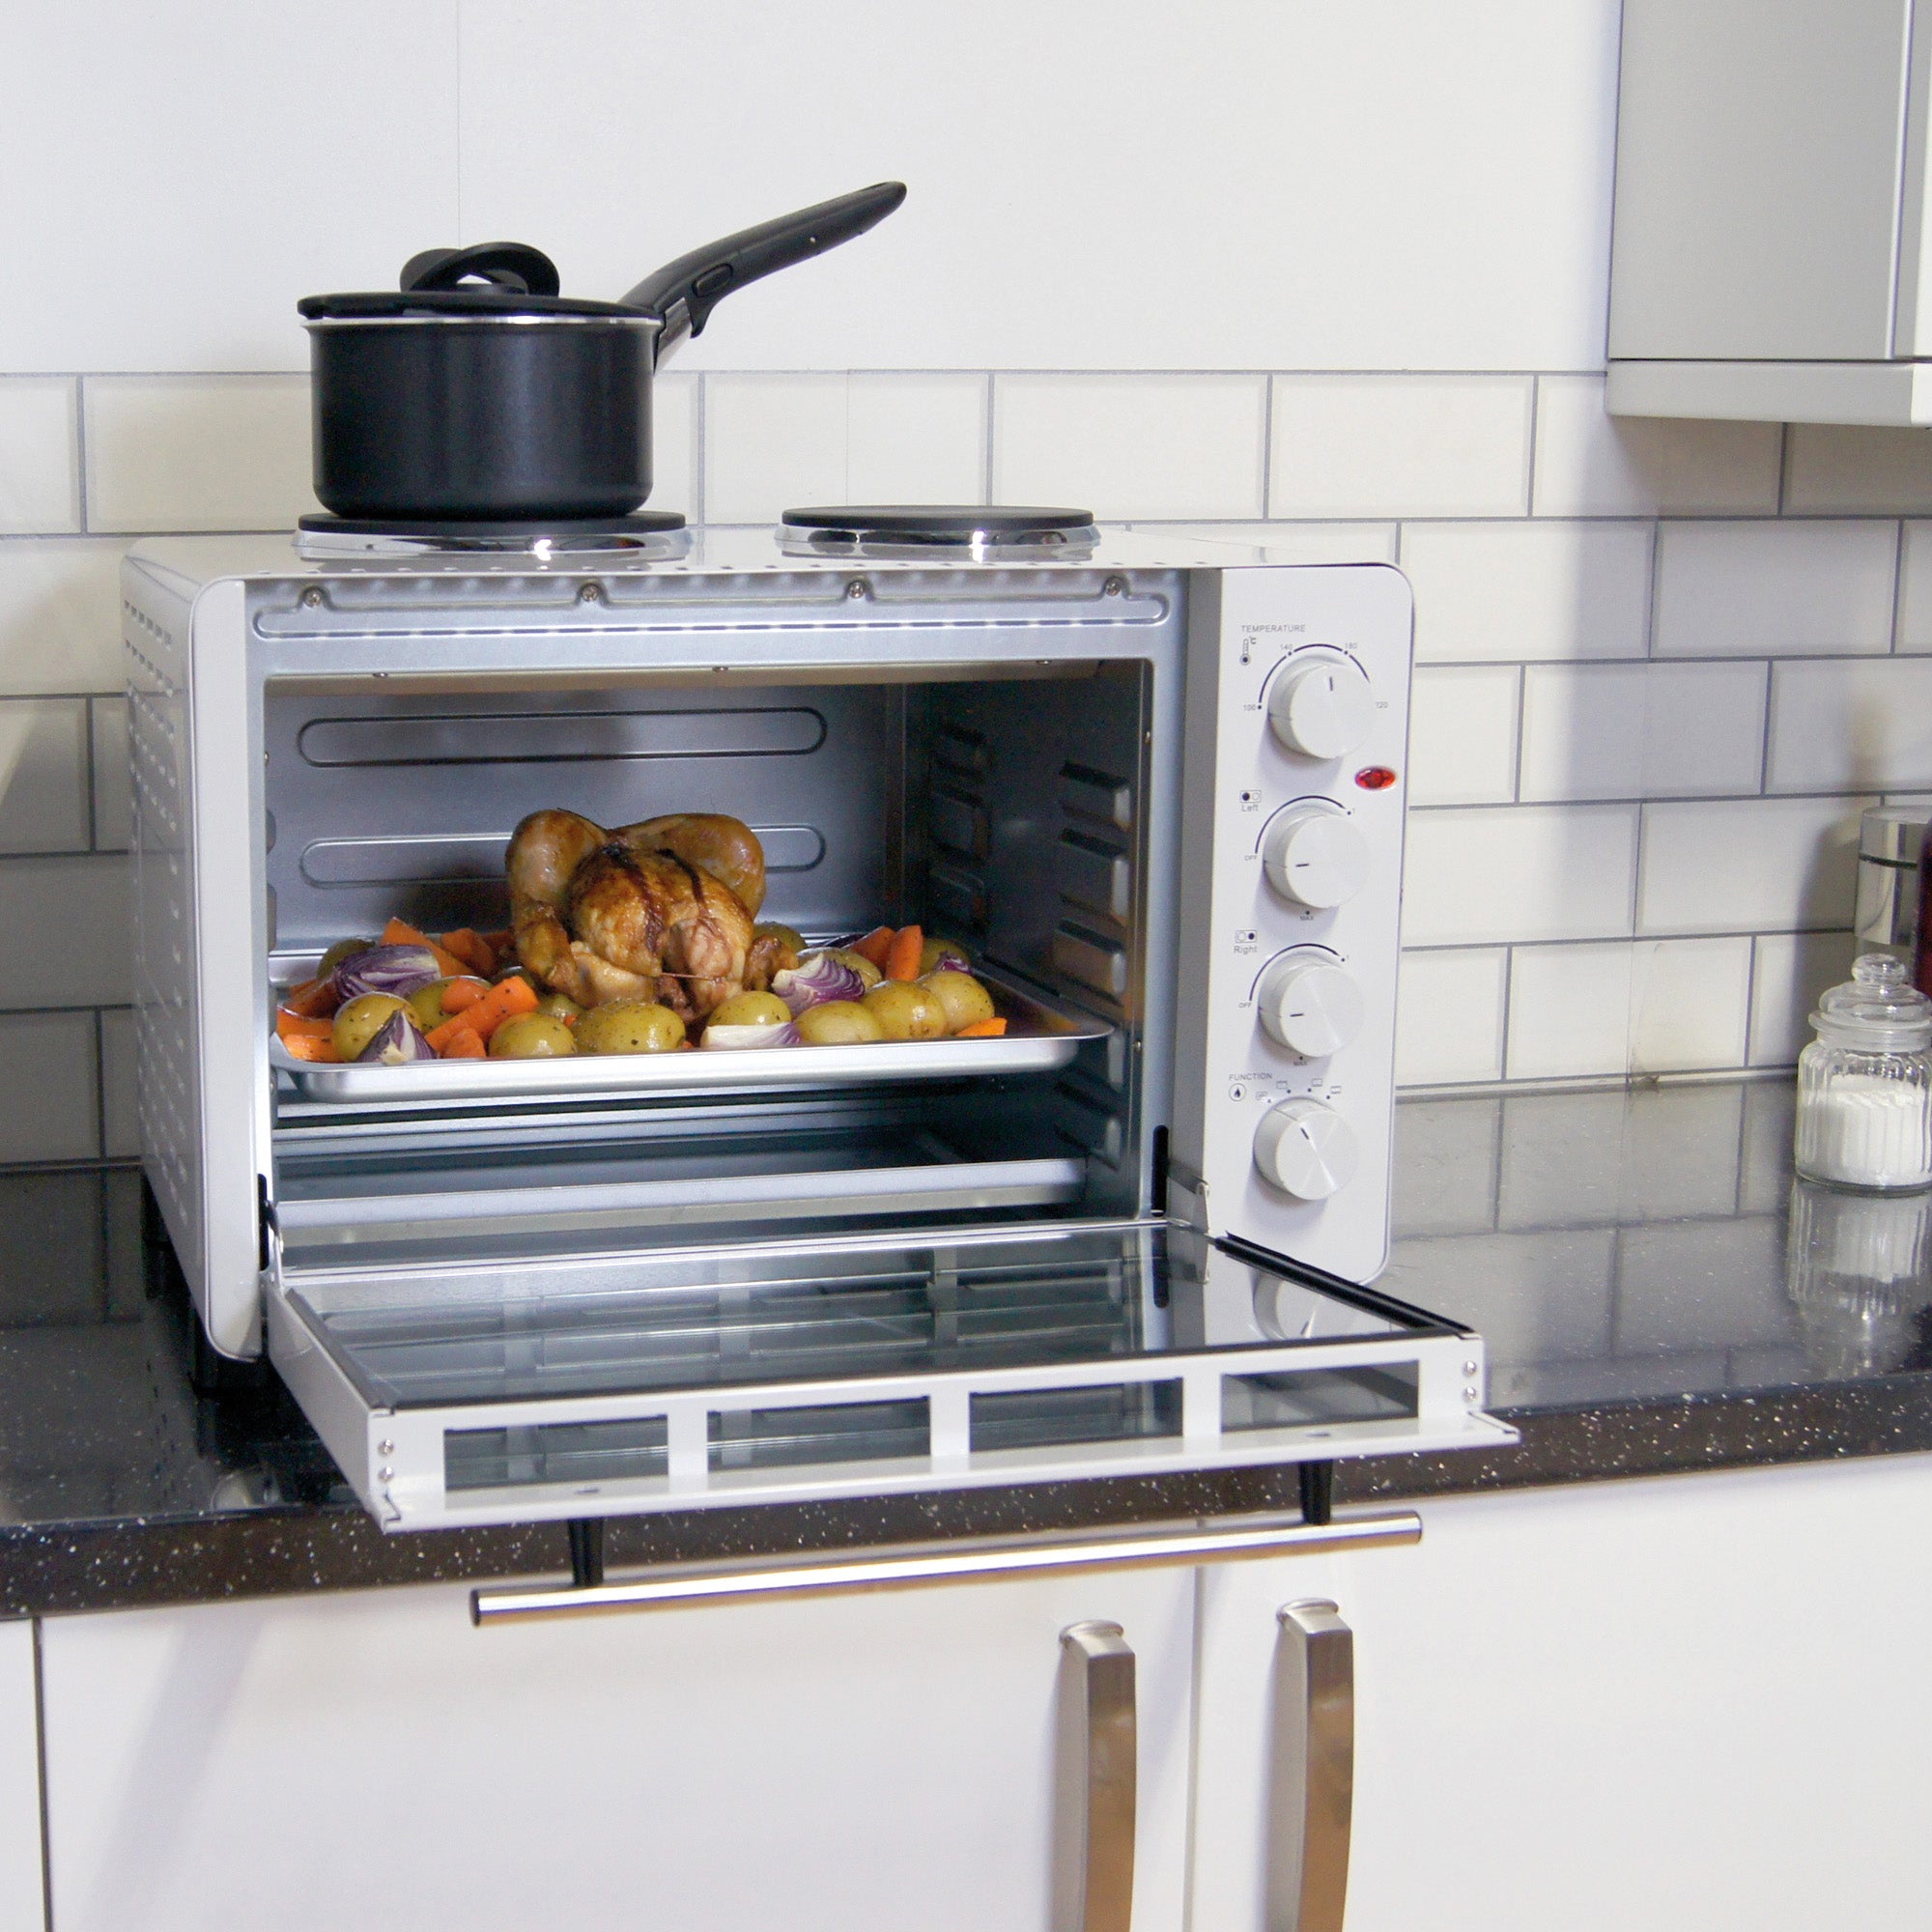 Electric Mini Oven with Hotplate Hobs, 45 Litres